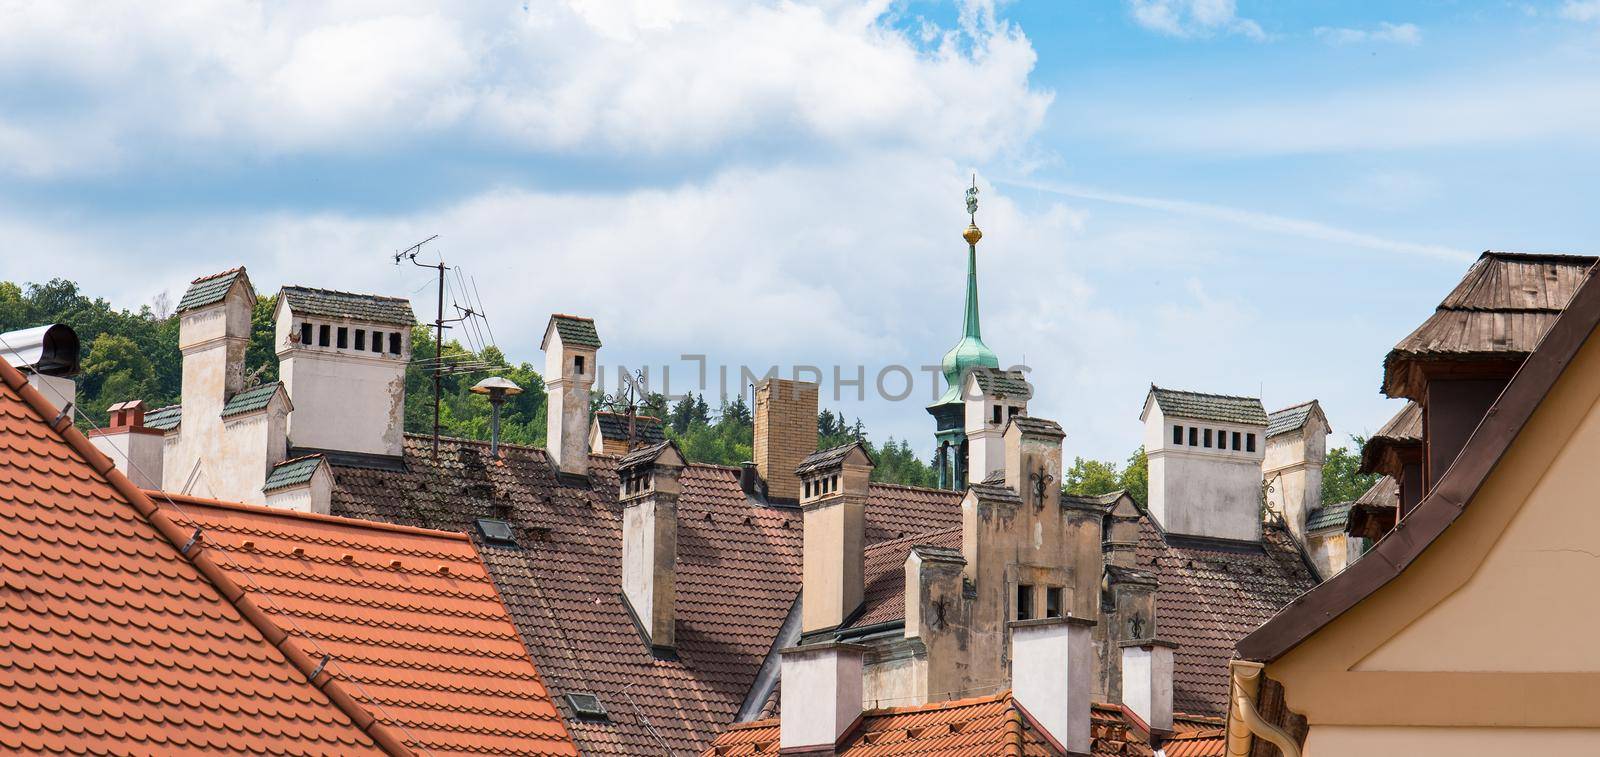 View of Loket Castle and town in summer by Jindrich_Blecha